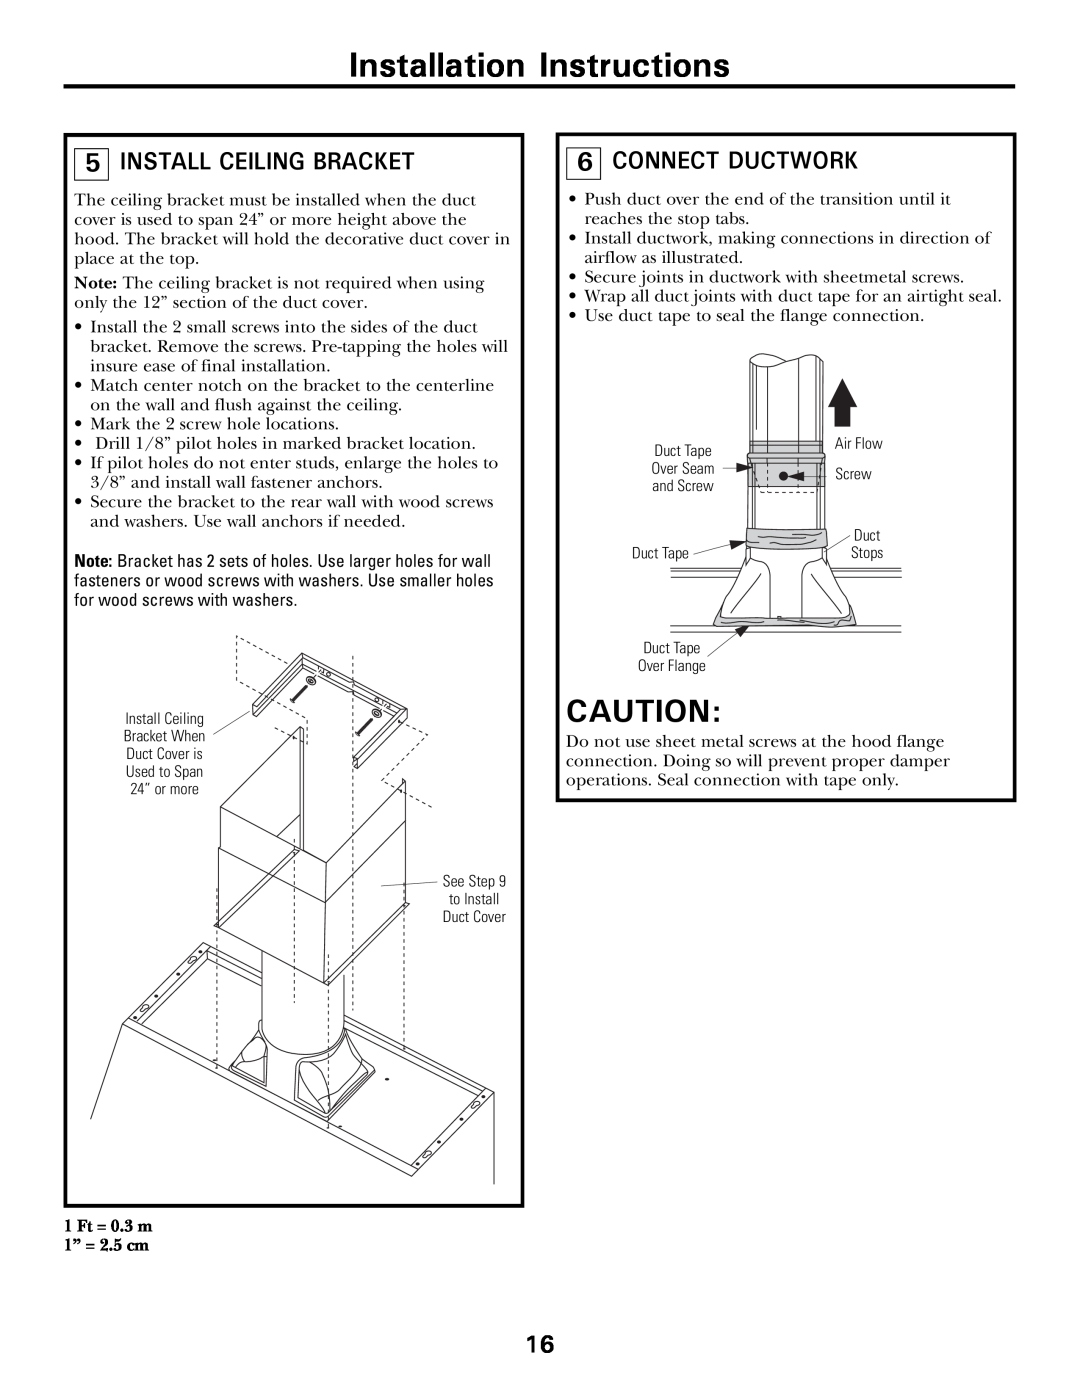 GE CV936 manual 5INSTALL CEILING BRACKET, 6CONNECT DUCTWORK, Installation Instructions, 1 Ft = 0.3 m 1” = 2.5 cm 